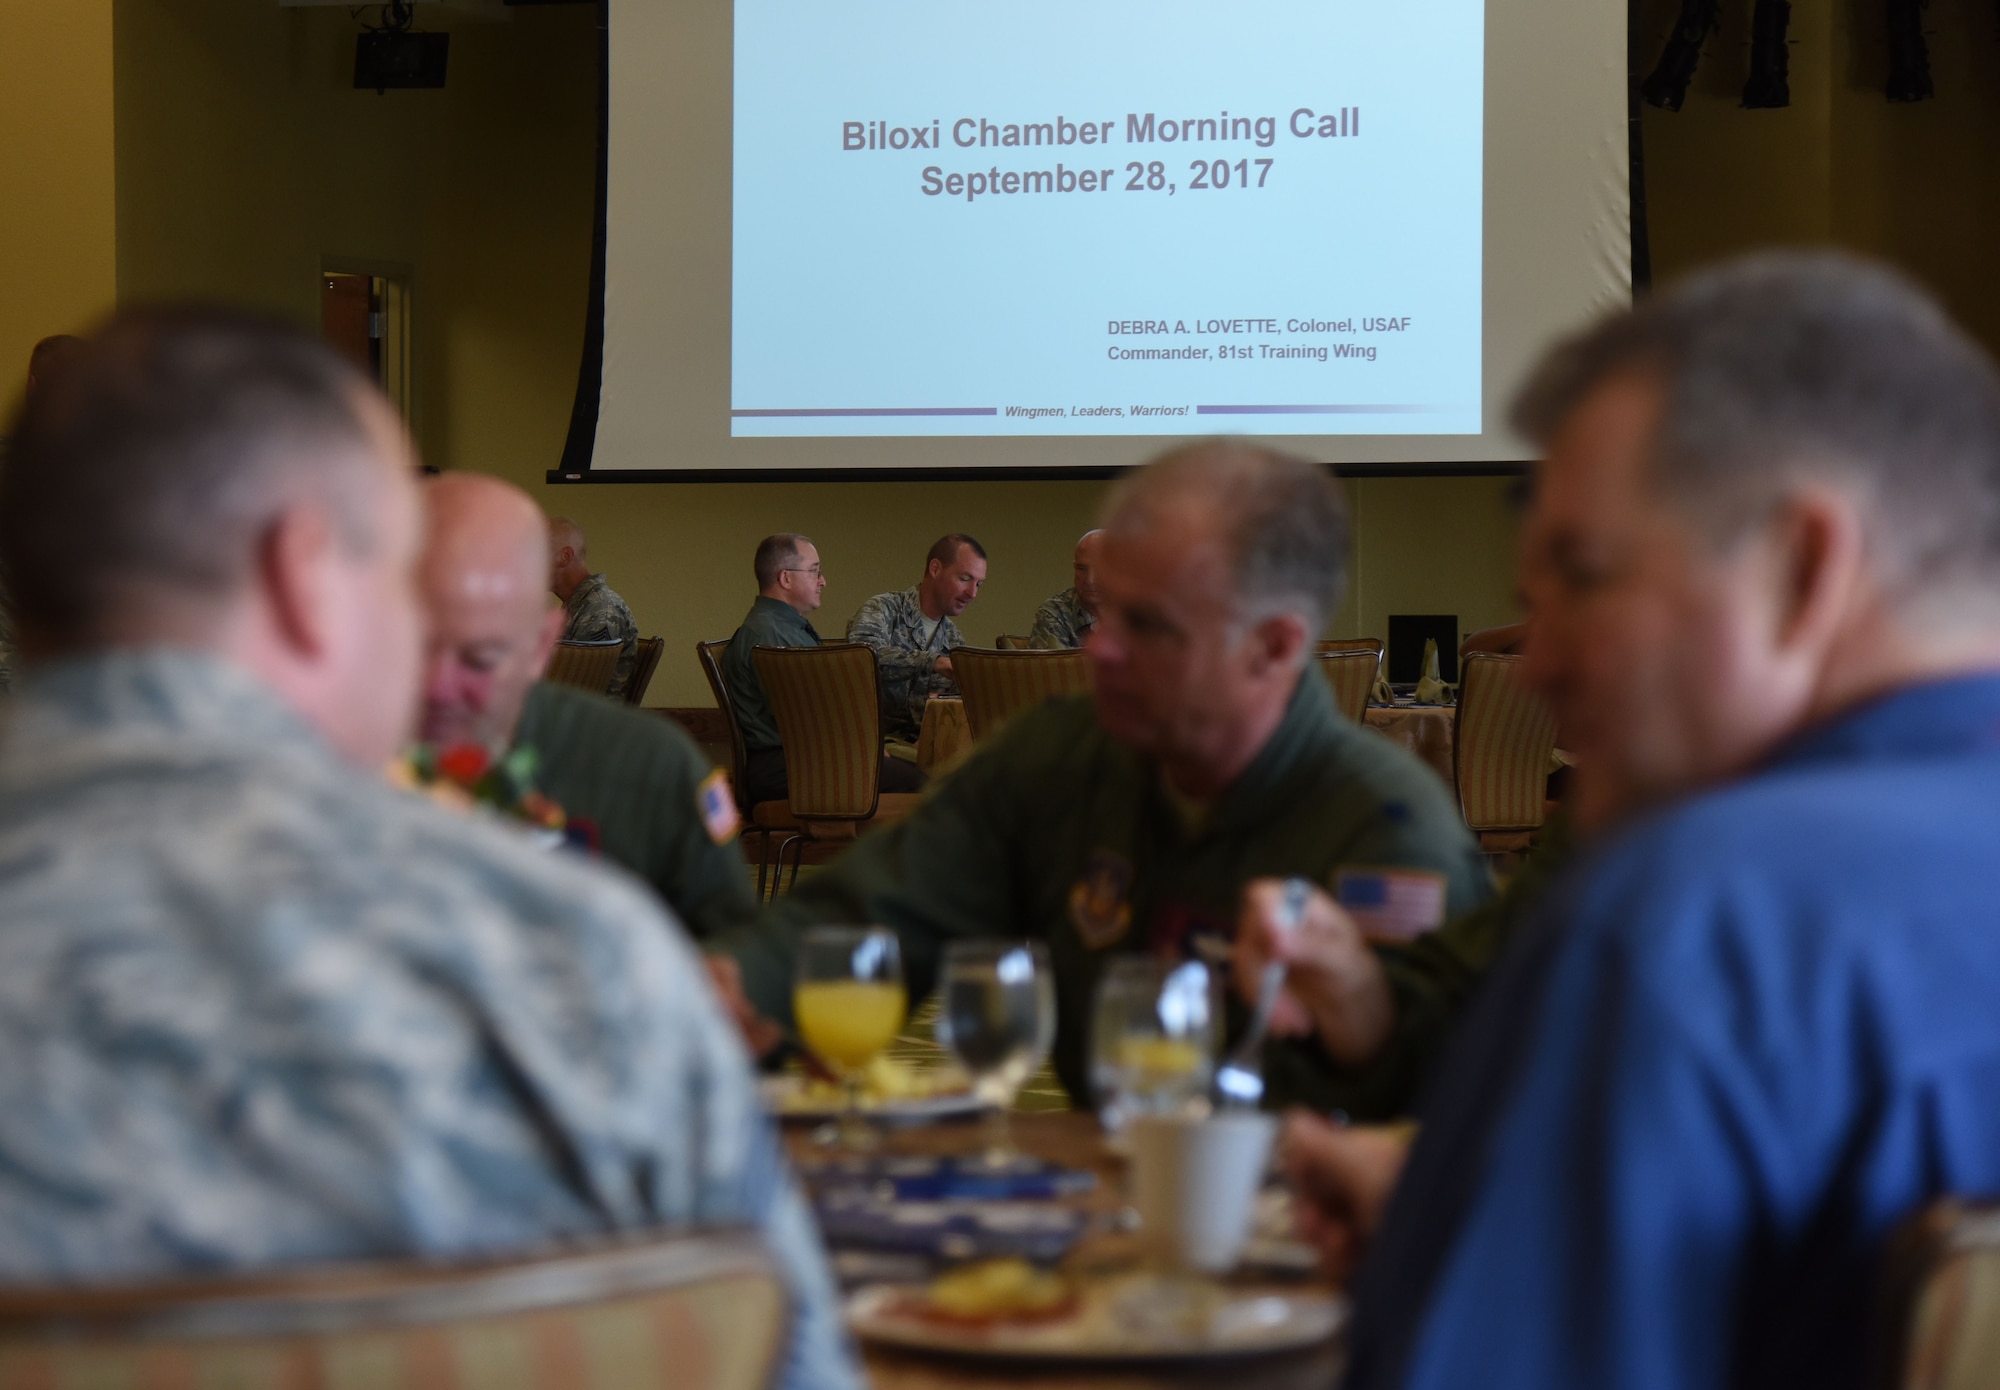 Members of Keesler Air Force Base and the local community attend the Biloxi Chamber Morning Call at the Bay Breeze Event Center Sept. 28, 2017, on Keesler AFB, Mississippi. Local business and community leaders attended the event to learn more about the base’s mission and its Airmen. During the event, hosted by the 81st Training Wing, members of the 334th Training Squadron drill team performed and several Keesler Airmen shared their story about why they joined the Air Force. (U.S. Air Force photo by Kemberly Groue)